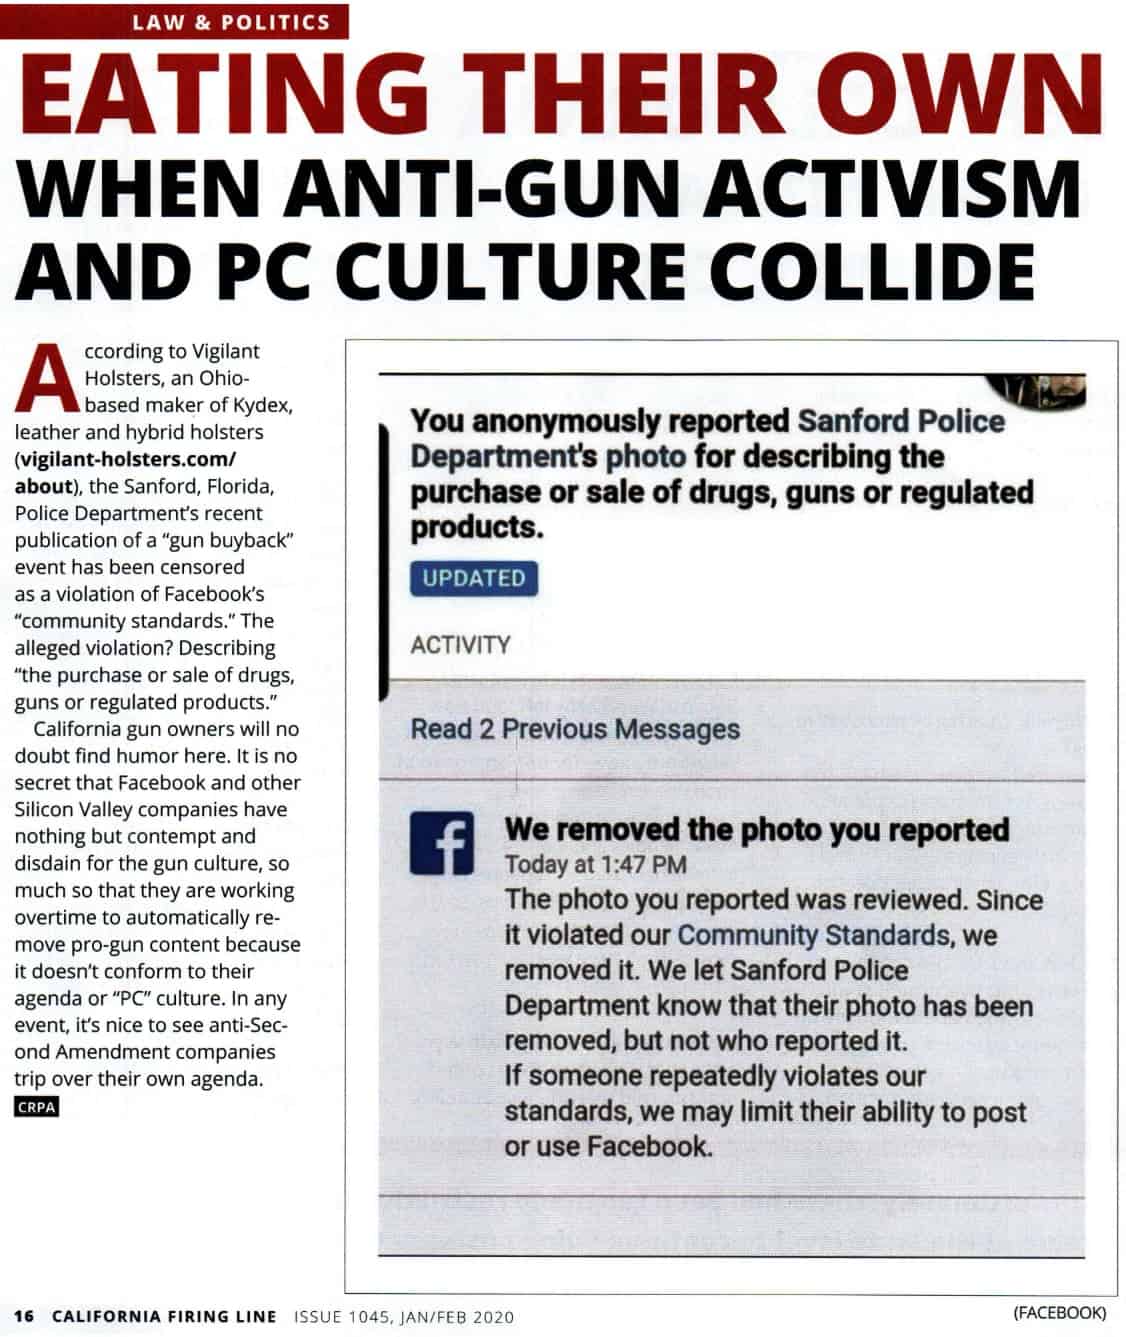 Eating their own: When anti-gun activism and PC culture collide